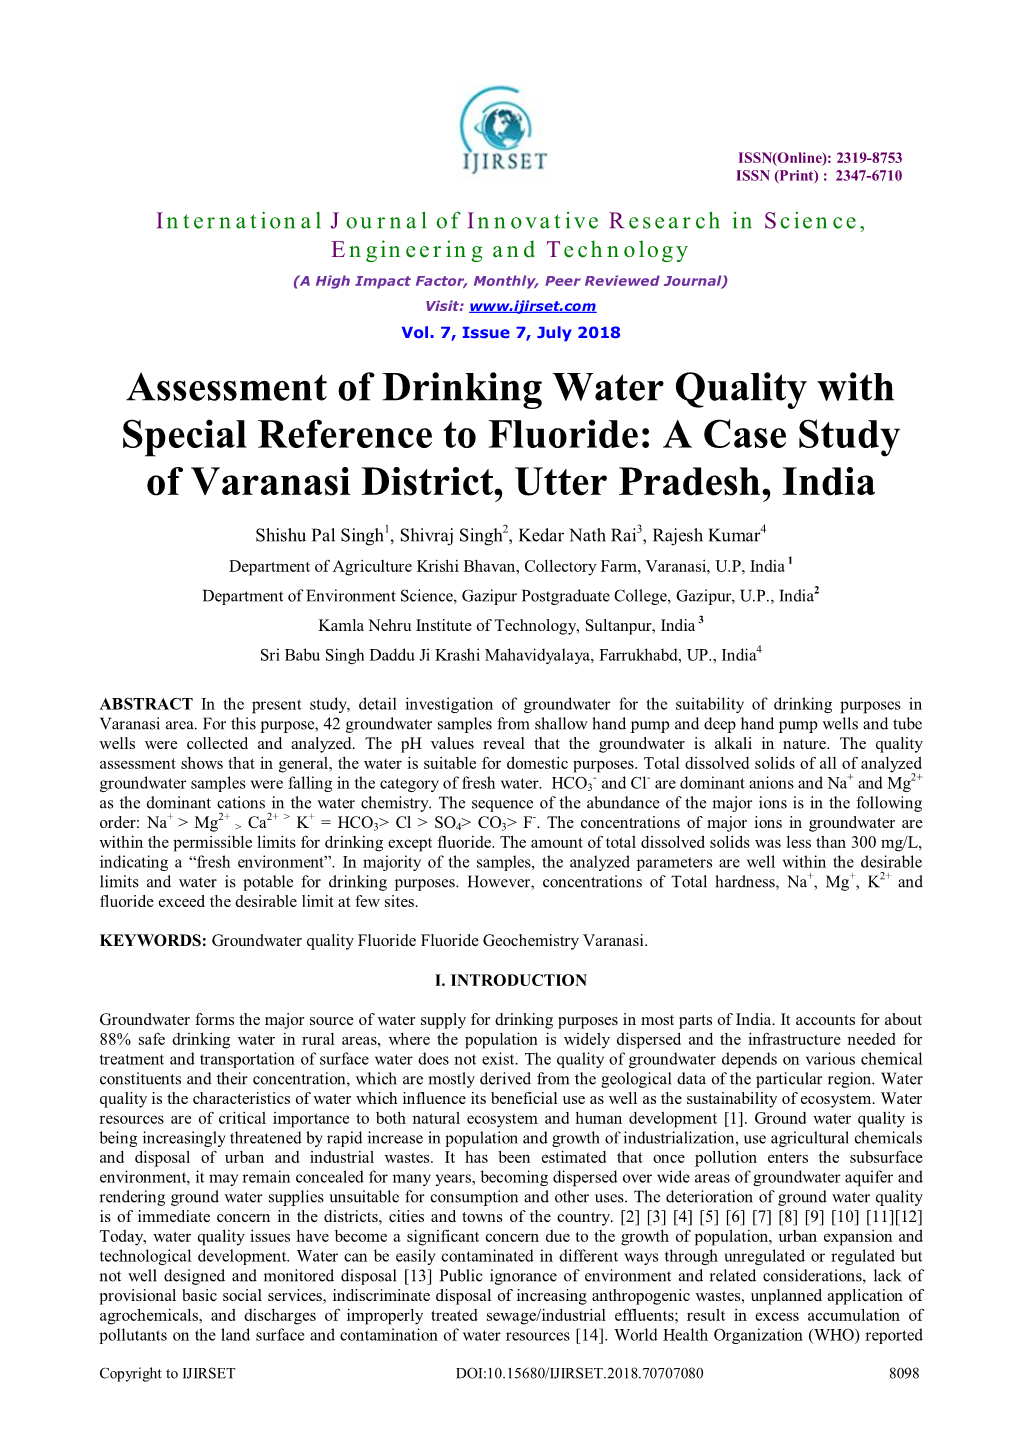 Assessment of Drinking Water Quality with Special Reference to Fluoride: a Case Study of Varanasi District, Utter Pradesh, India